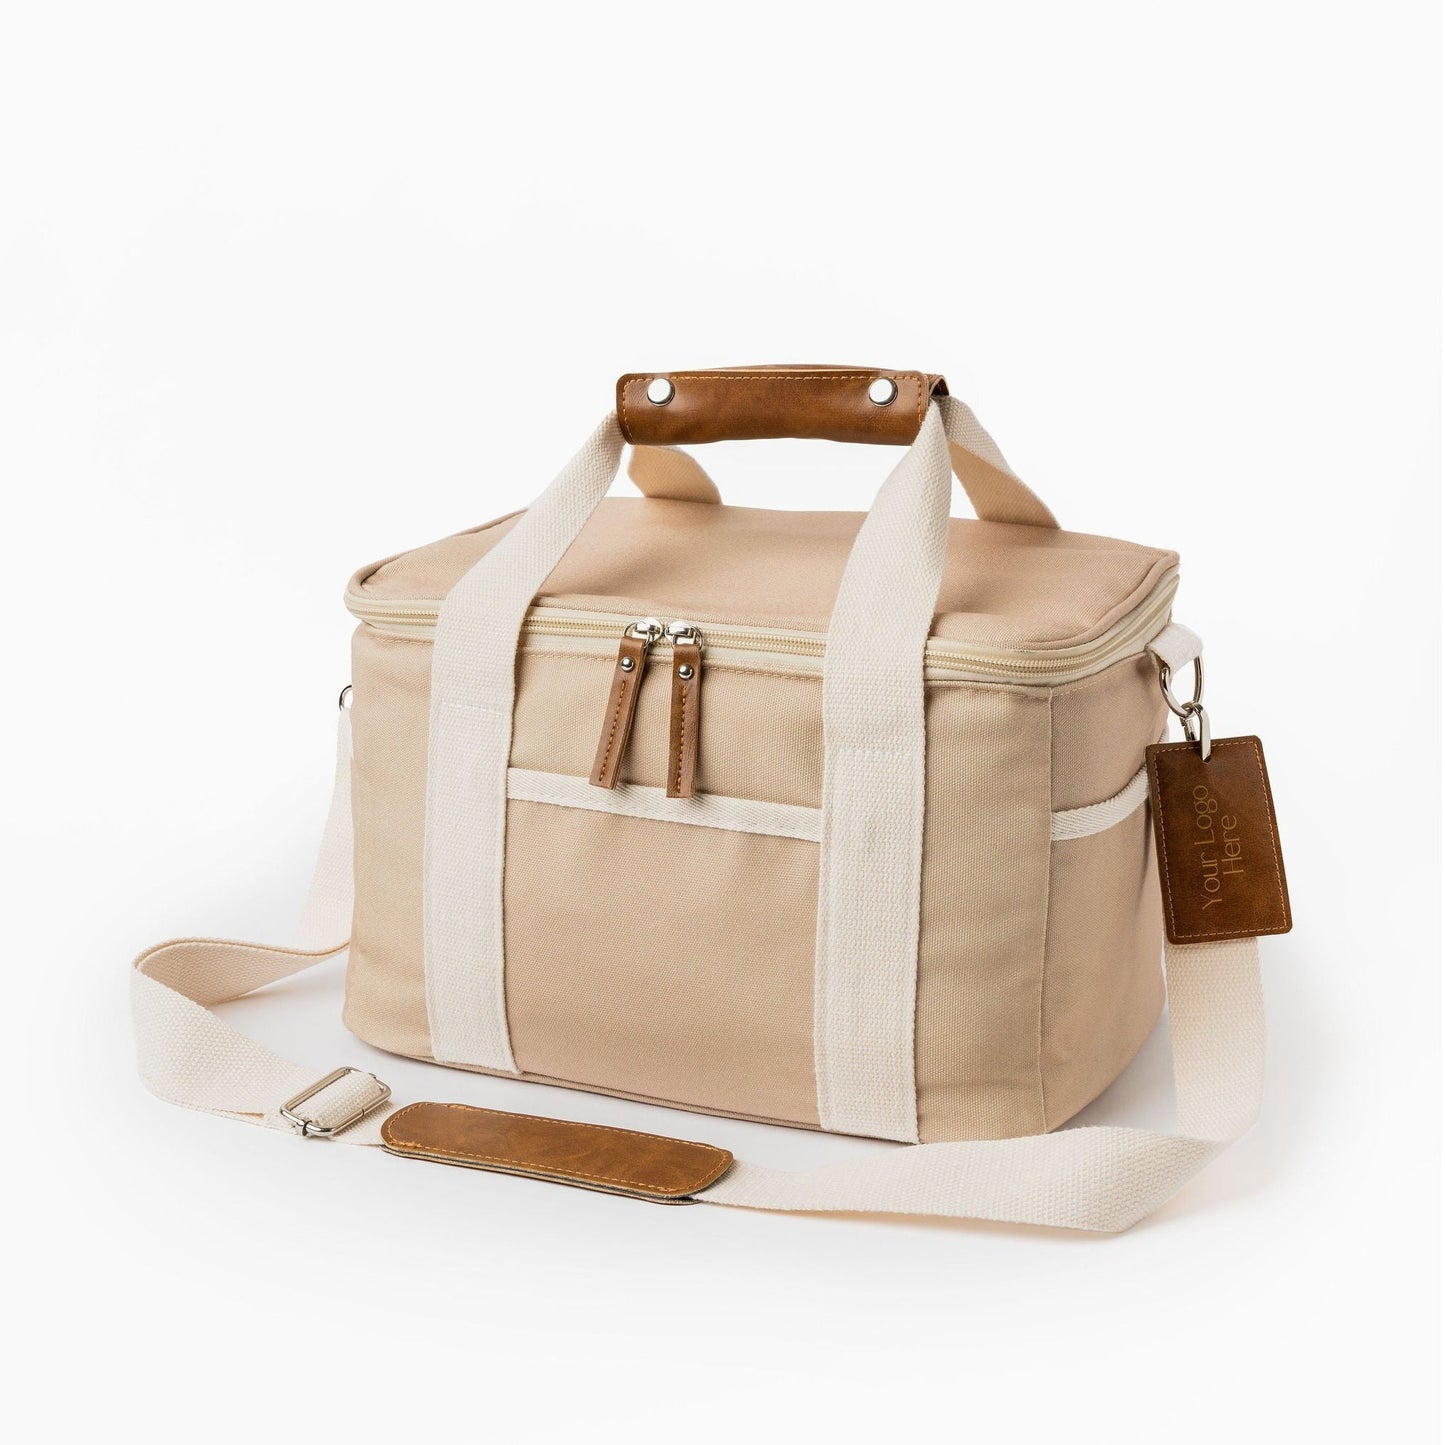 Insulated Cooler Bag - Taupe